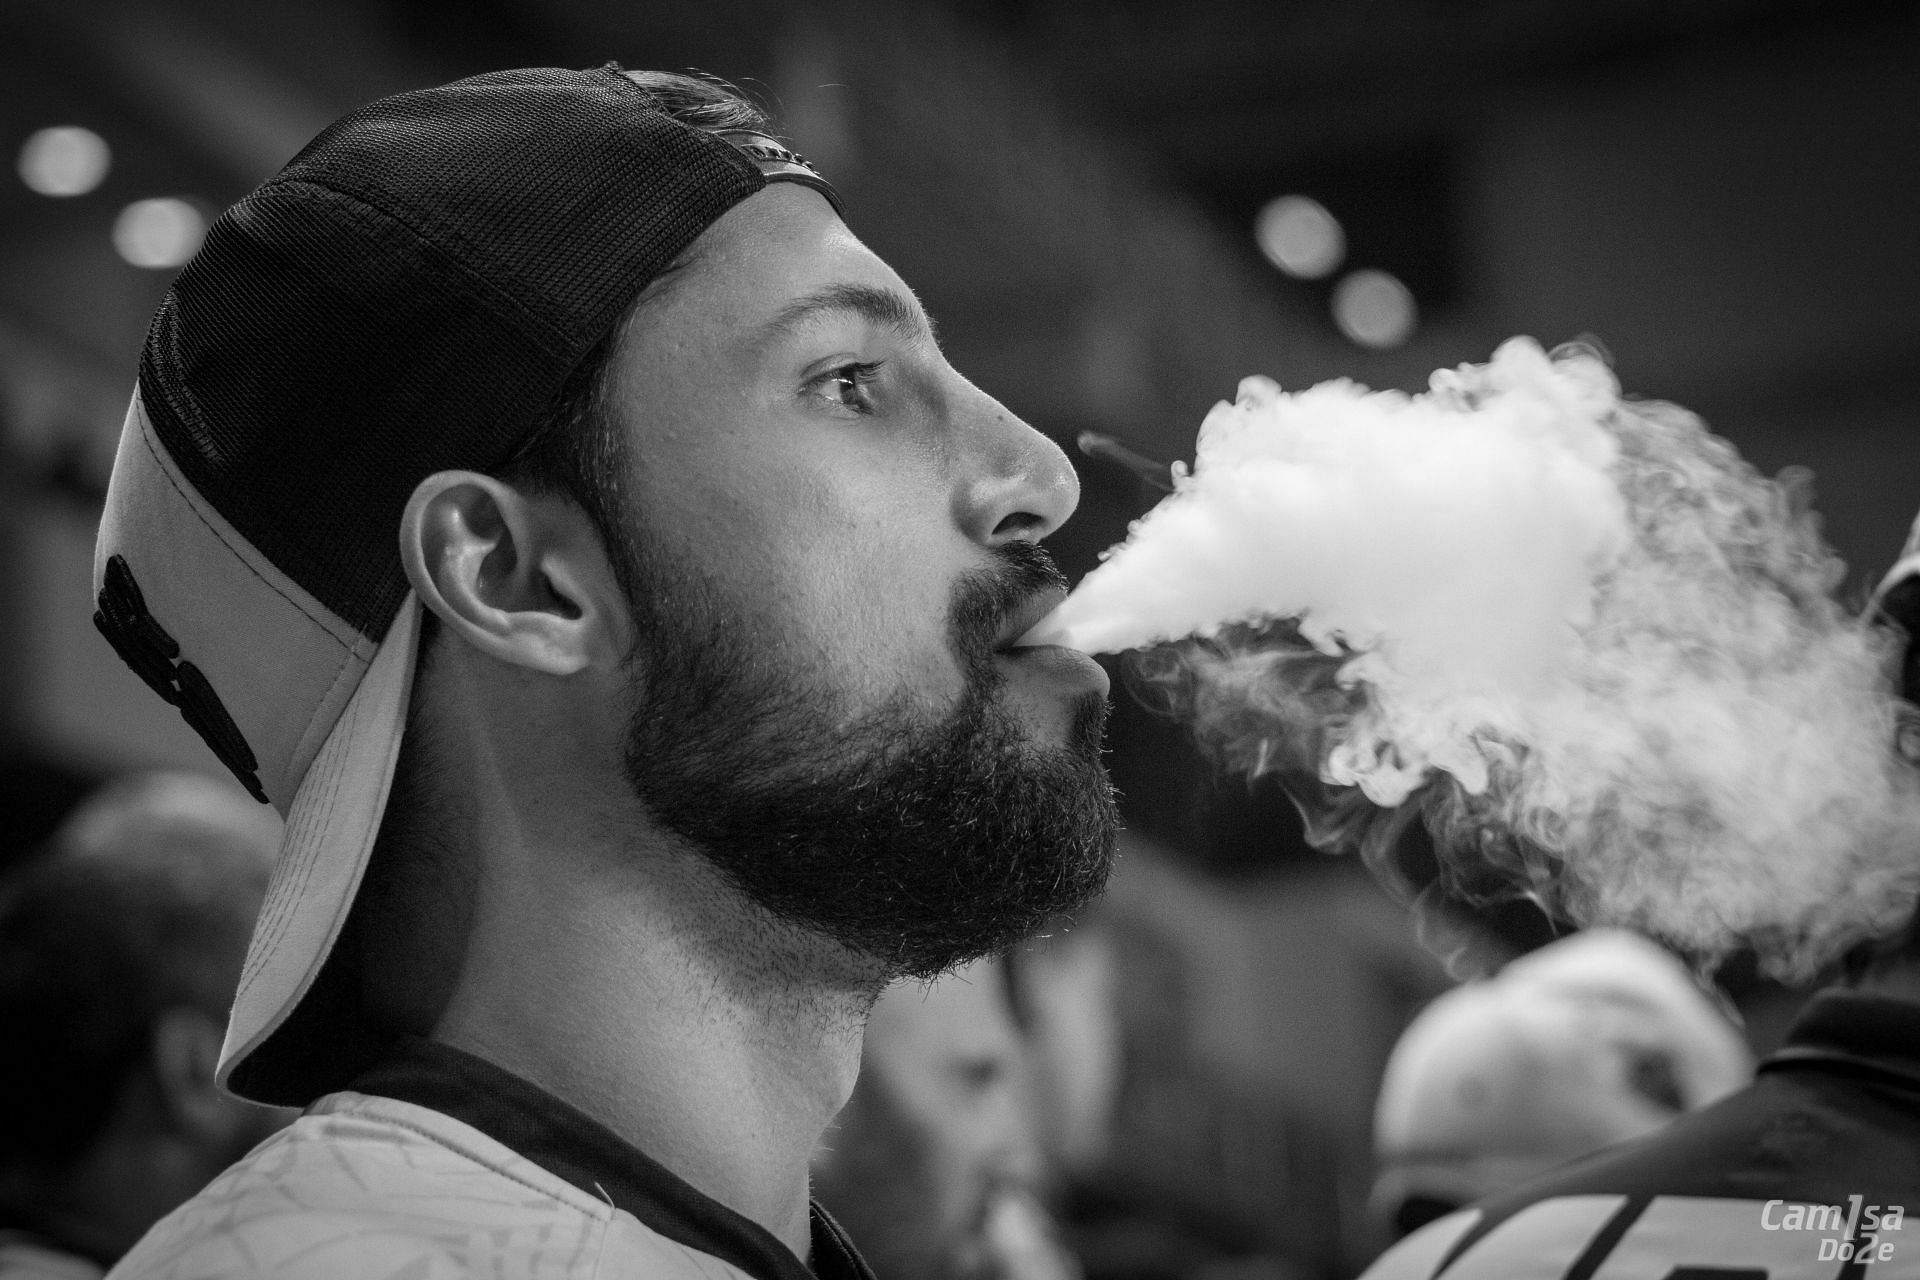 Vaping side effects include hampered brain decisions. (Image via Pexels/ Miguel Arcanjo)